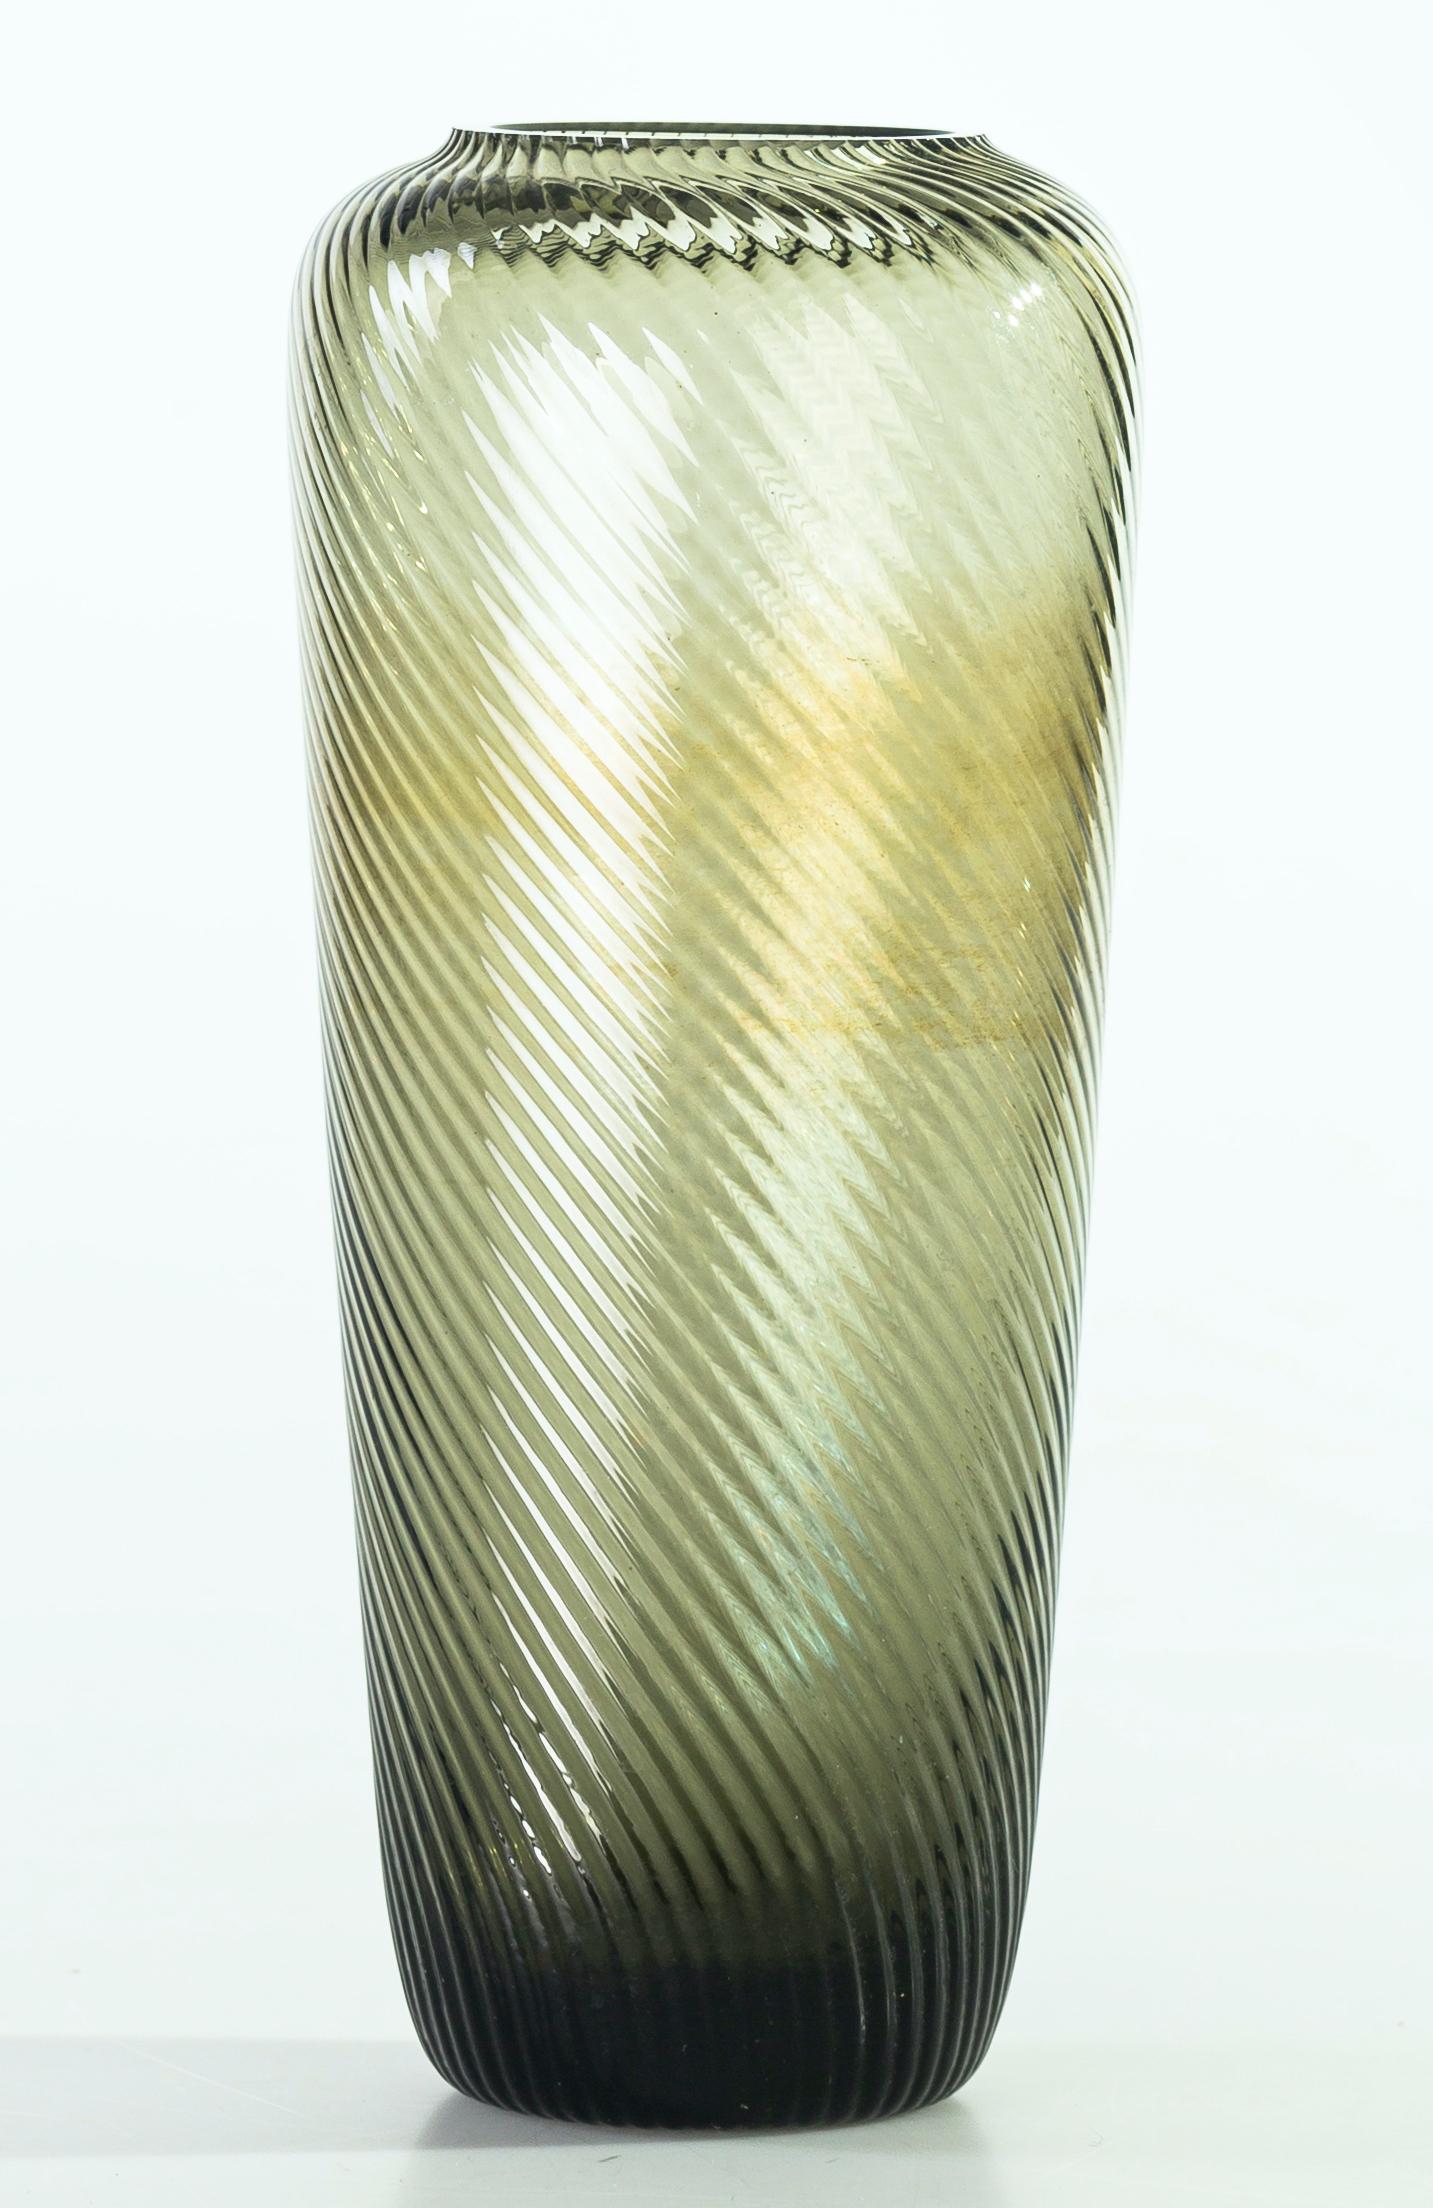 This is a Fumé glass vase, a beautiful smoked glass vase decorated all-over the body with slightly raised helical ribs.

Made in Germany in the 1960s of the 20th century. 
In excellent conditions.